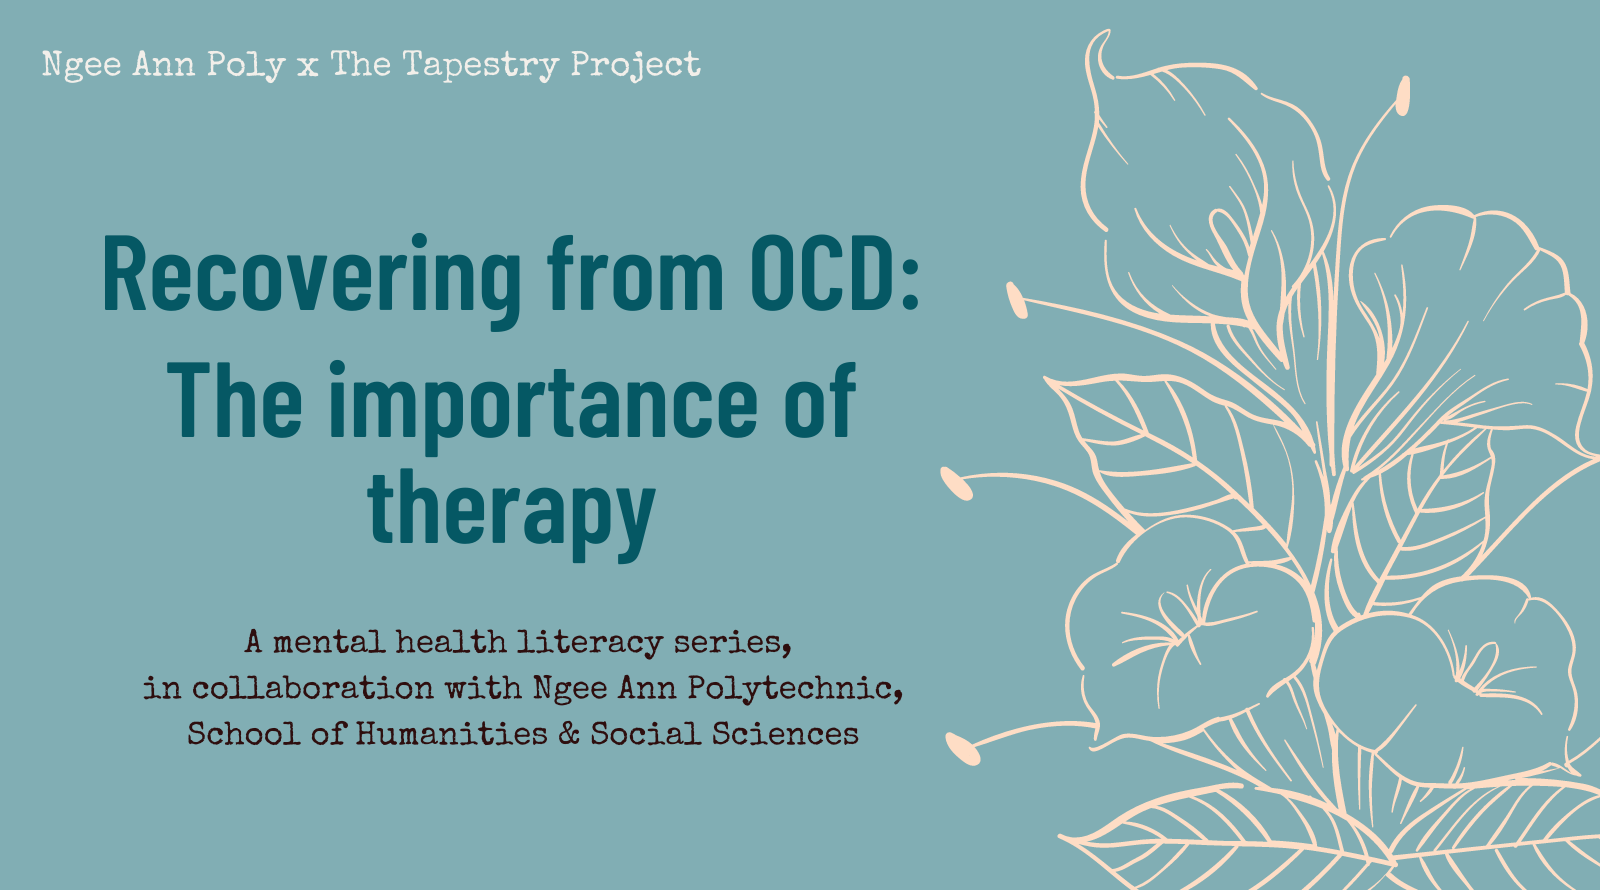 Recovering from OCD: The importance of therapy